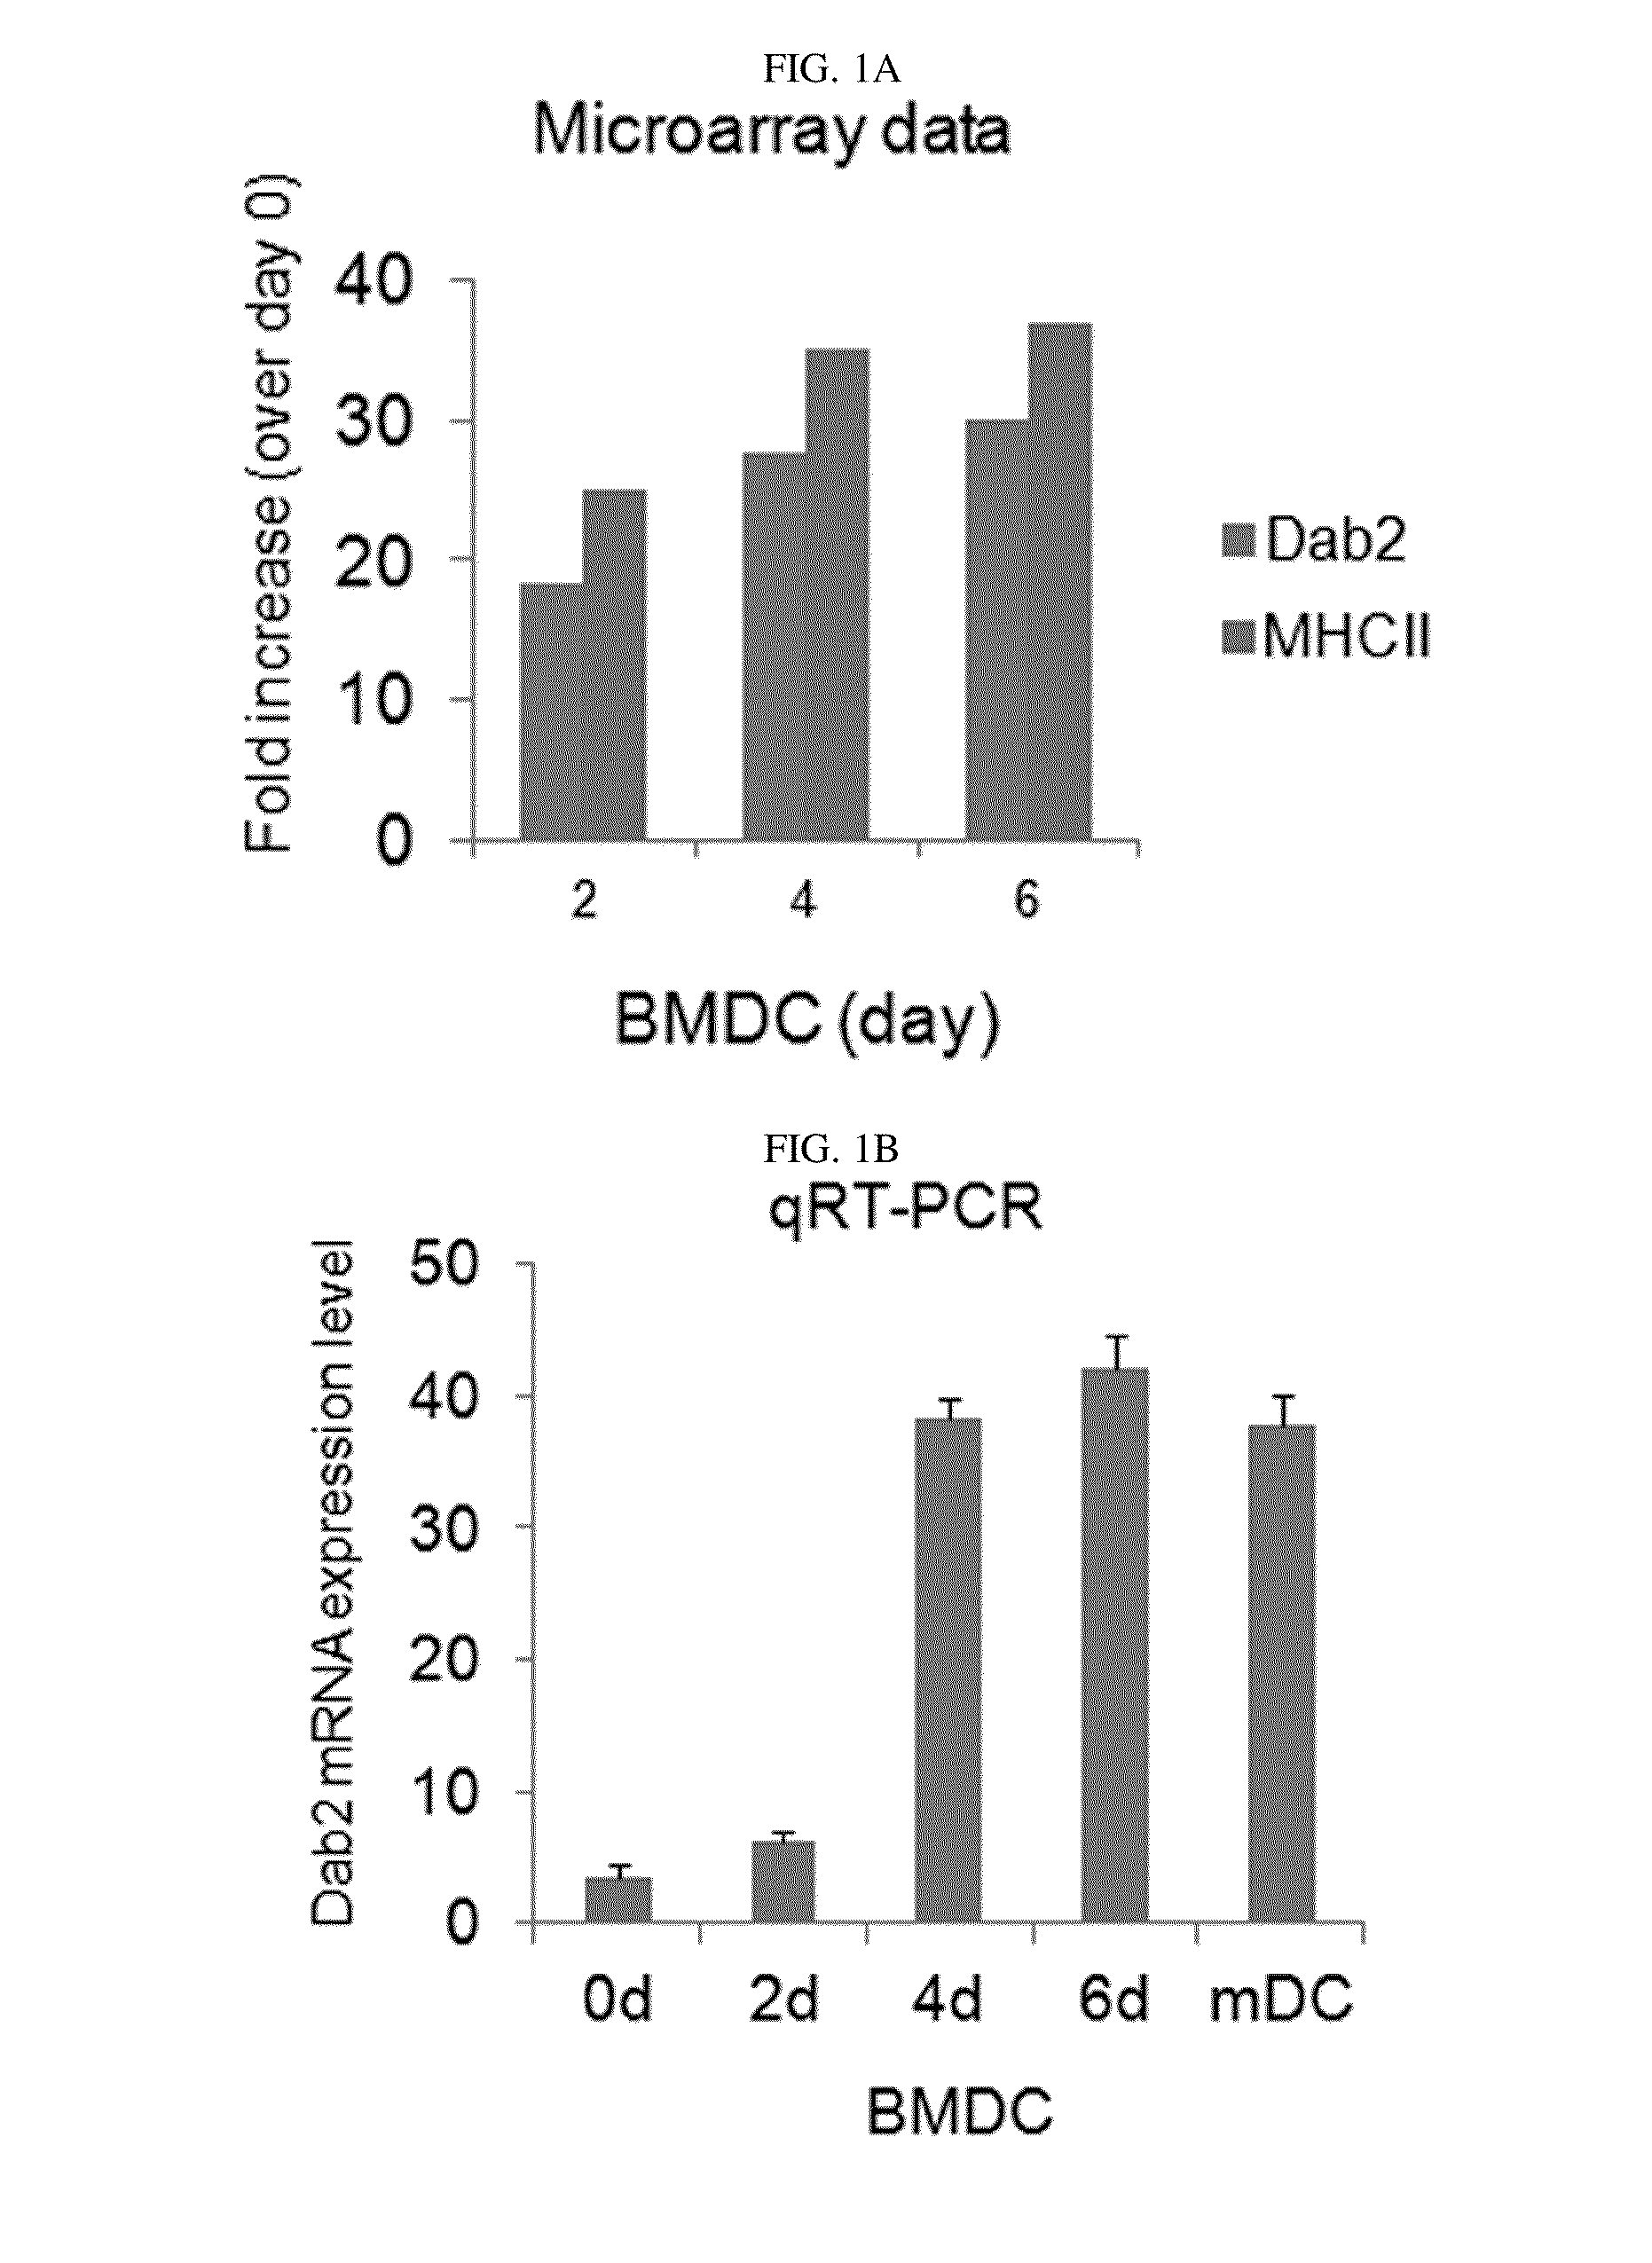 Pharmaceutical composition for preventing or treating cancers comprising dendritic cells with dab2 gene silenced